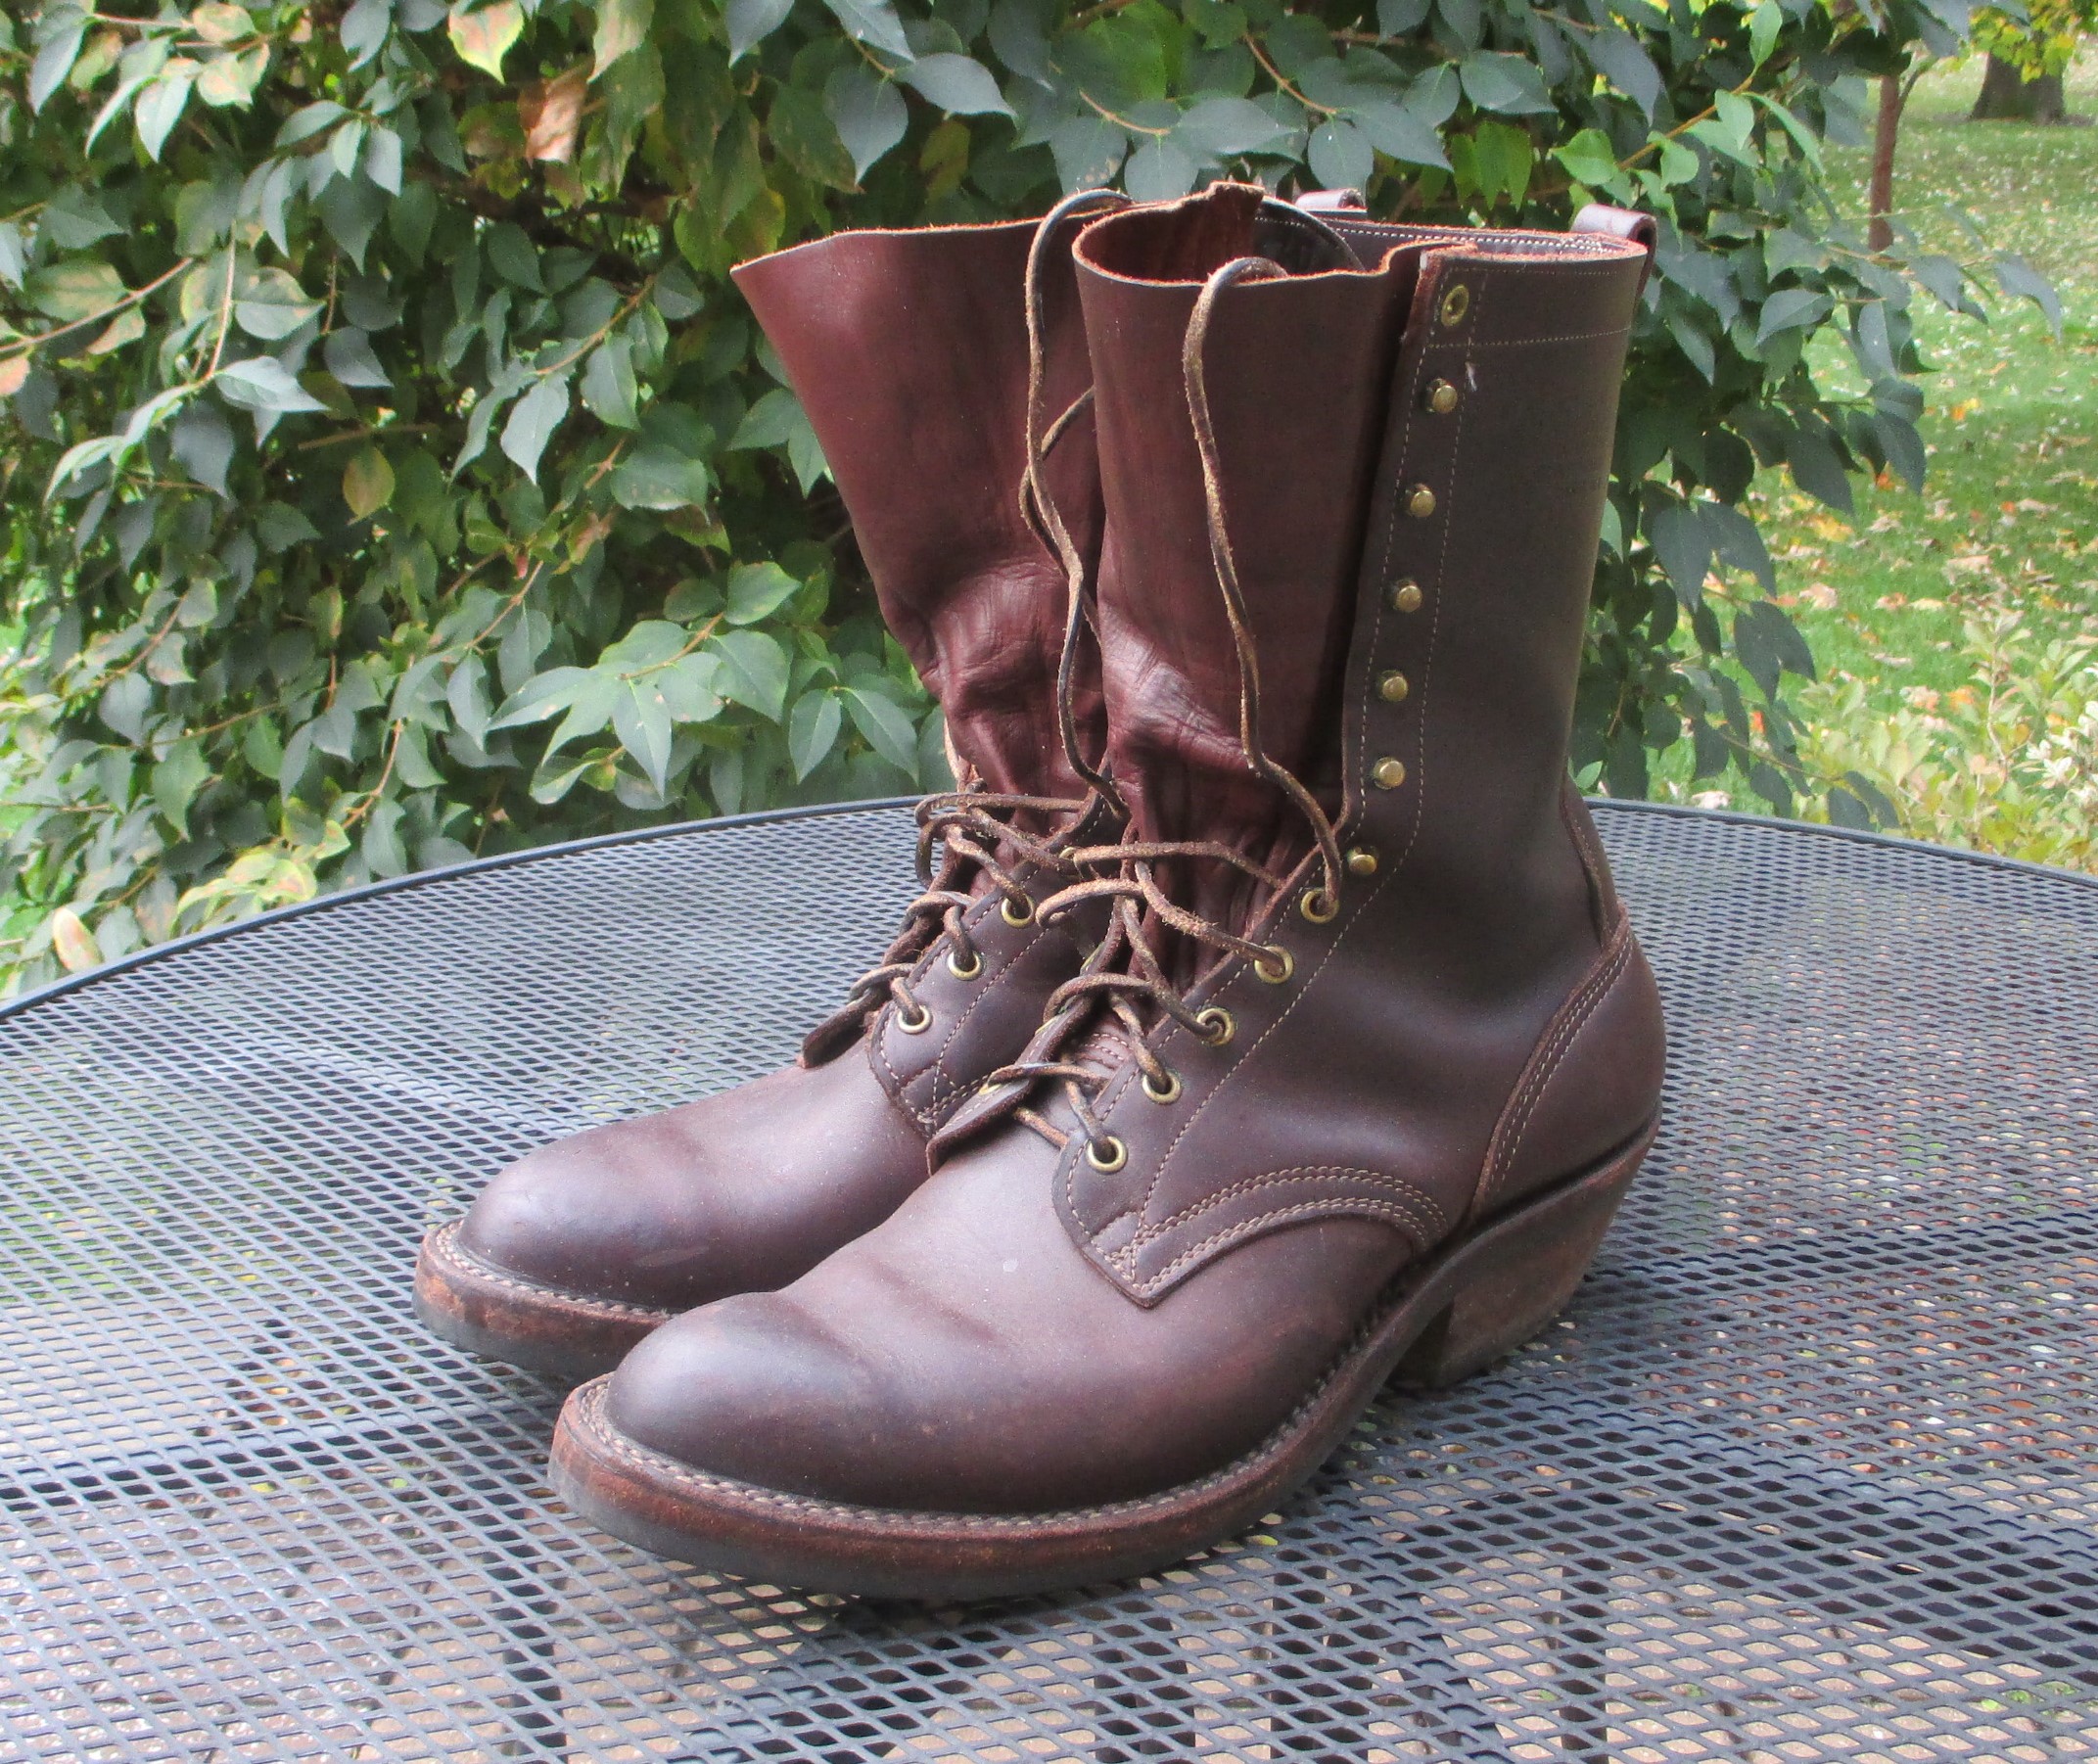 Nicks Packer Boots - 13D brown | The Fedora Lounge